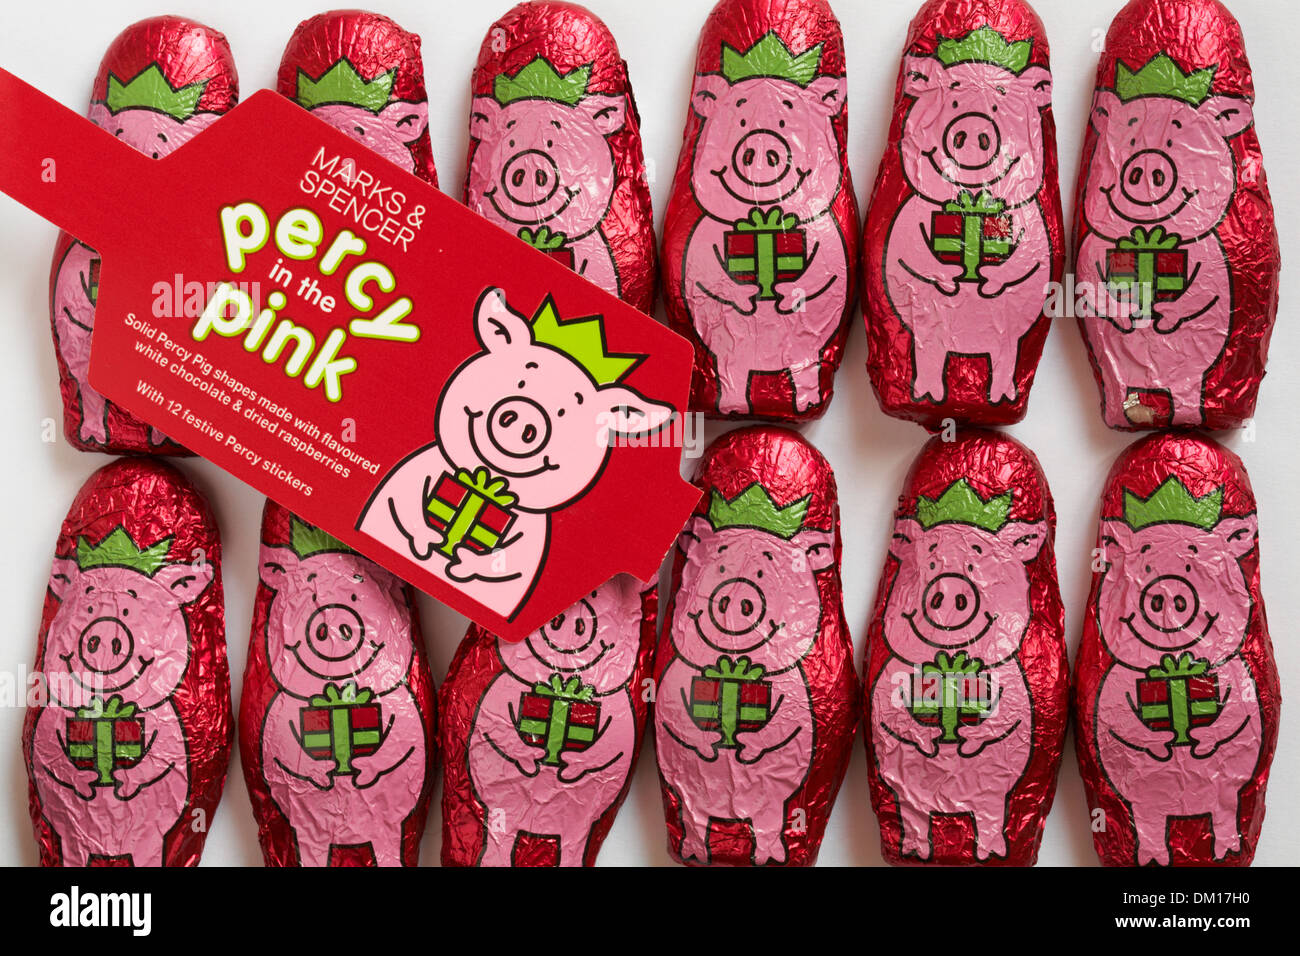 Marks & Spencer percy in the pink solid percy pig shapes made with flavoured white chocolate & dried raspberries Stock Photo